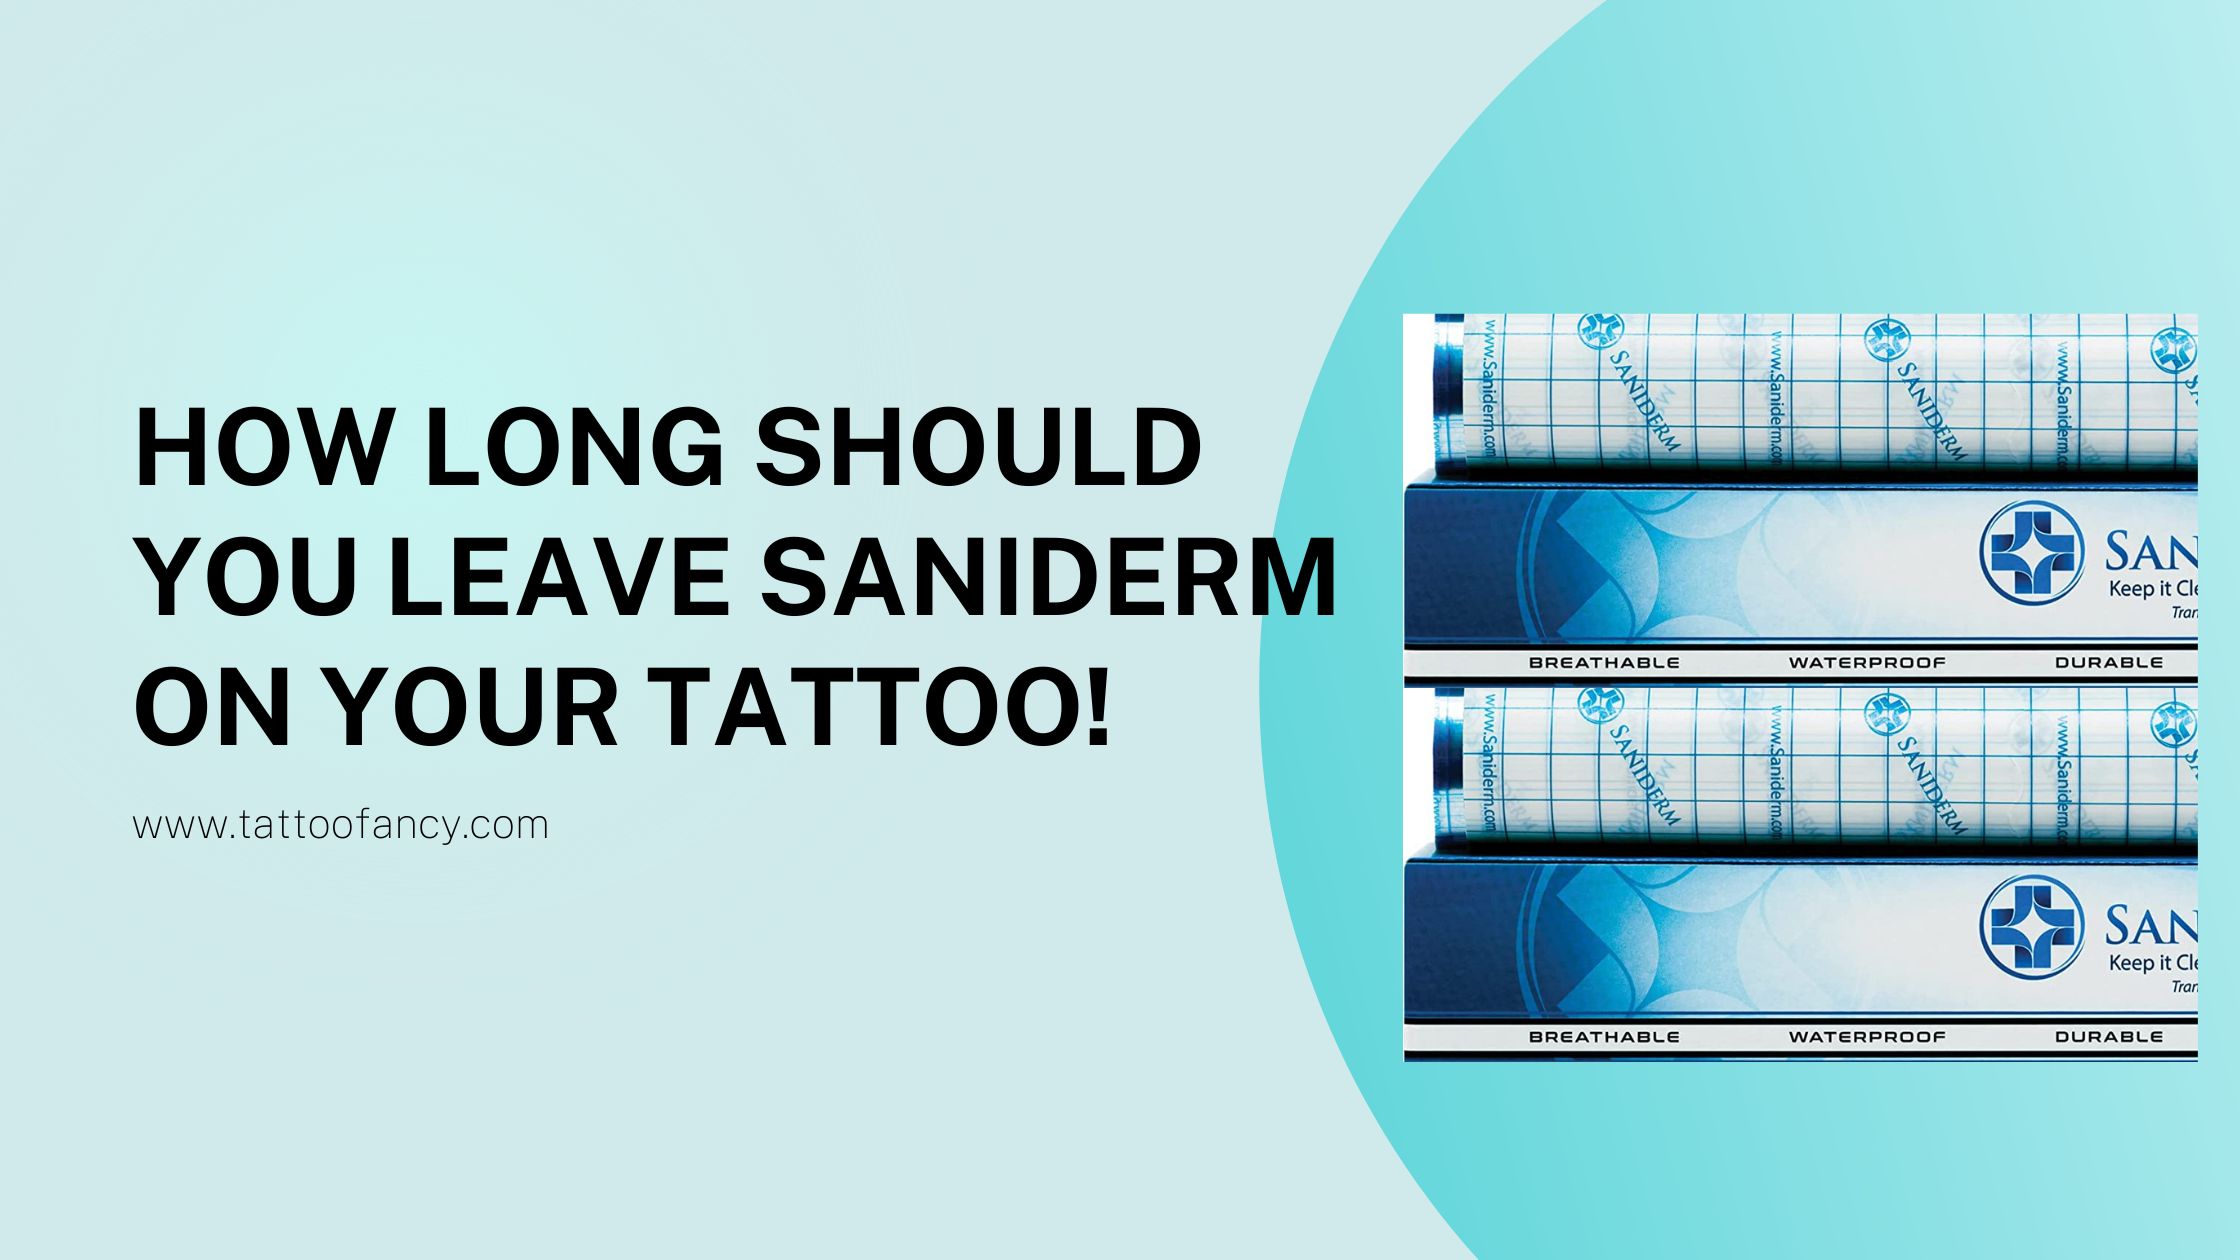 How long should you leave Saniderm on your tattoo? - Tattoofancy